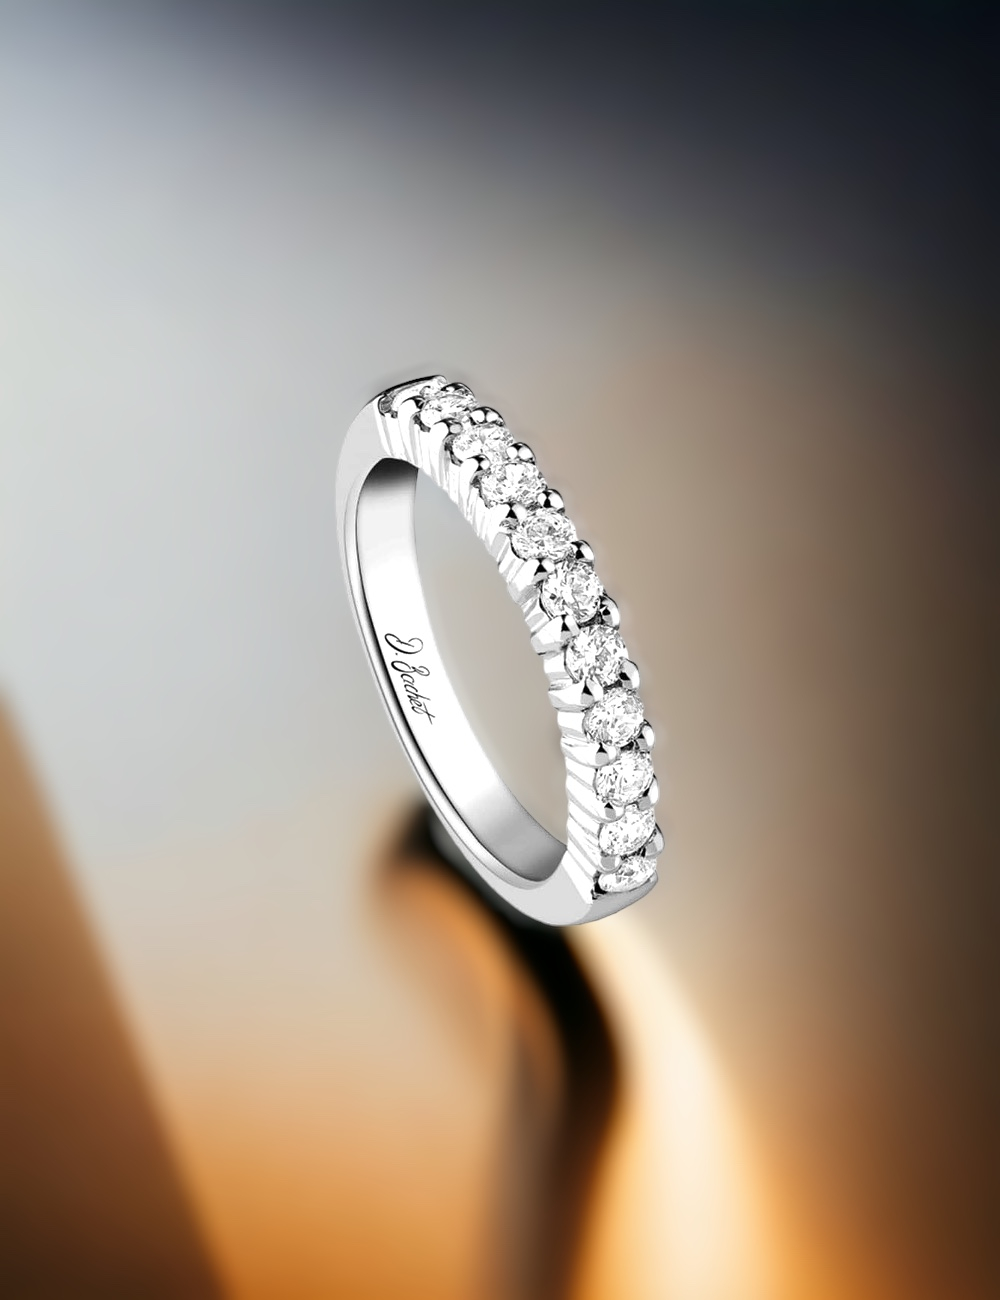 Diamond claw band, 0.55ct FVS, platinum/gold, handmade in France, timeless elegance by D.Bachet.